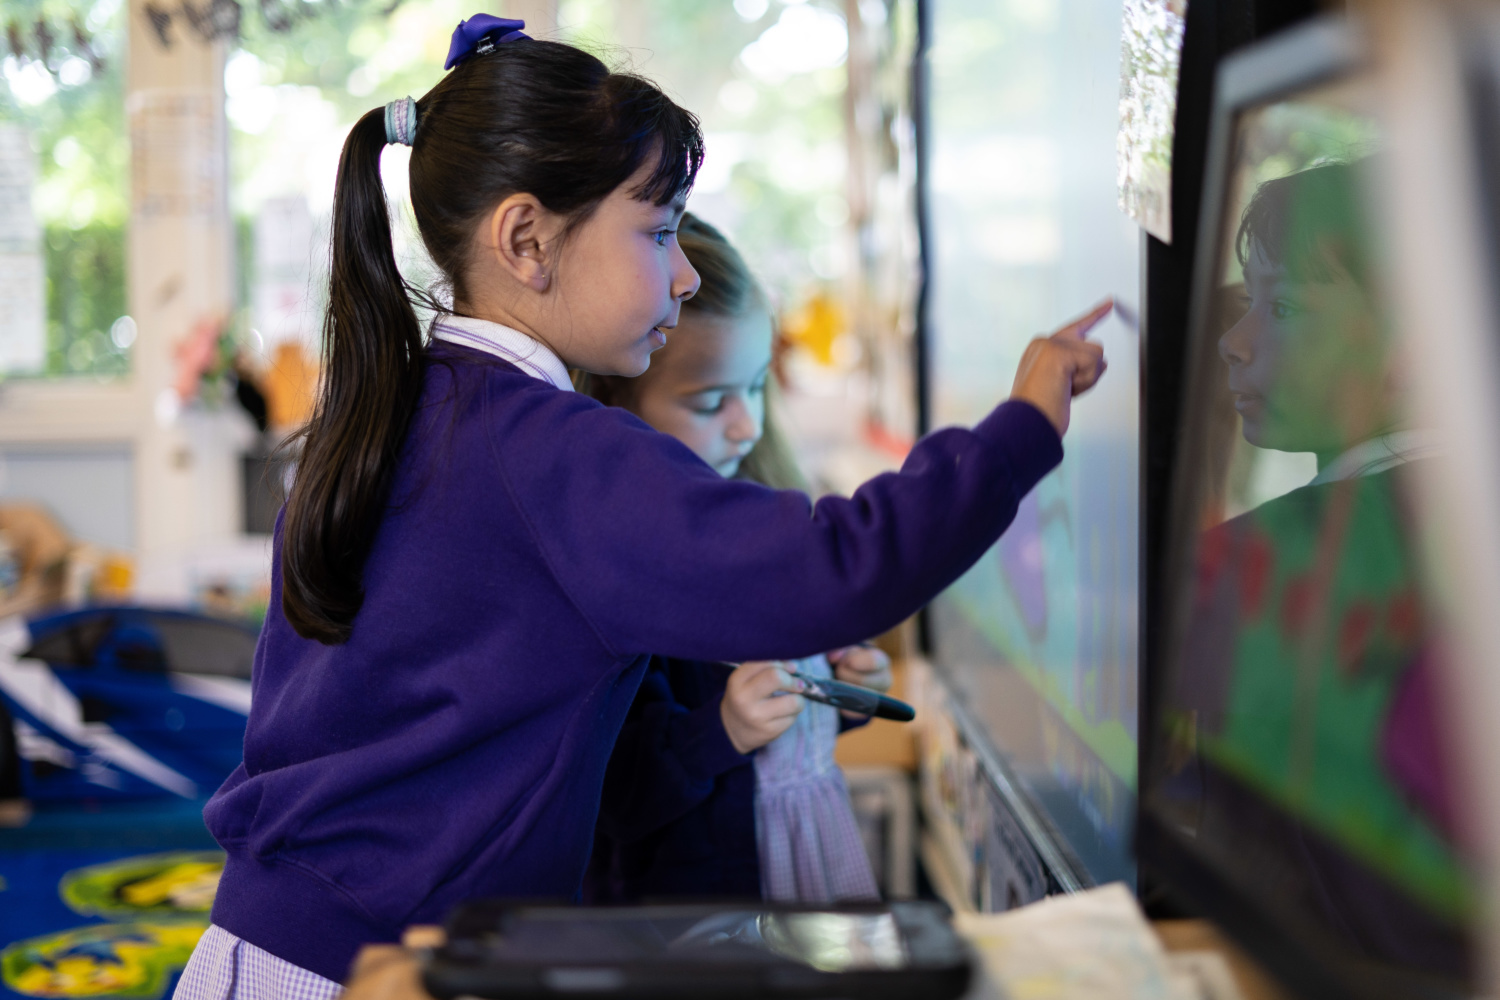 Two pupils are pictured interacting with a SMART Interactive Board at the front of a classroom.